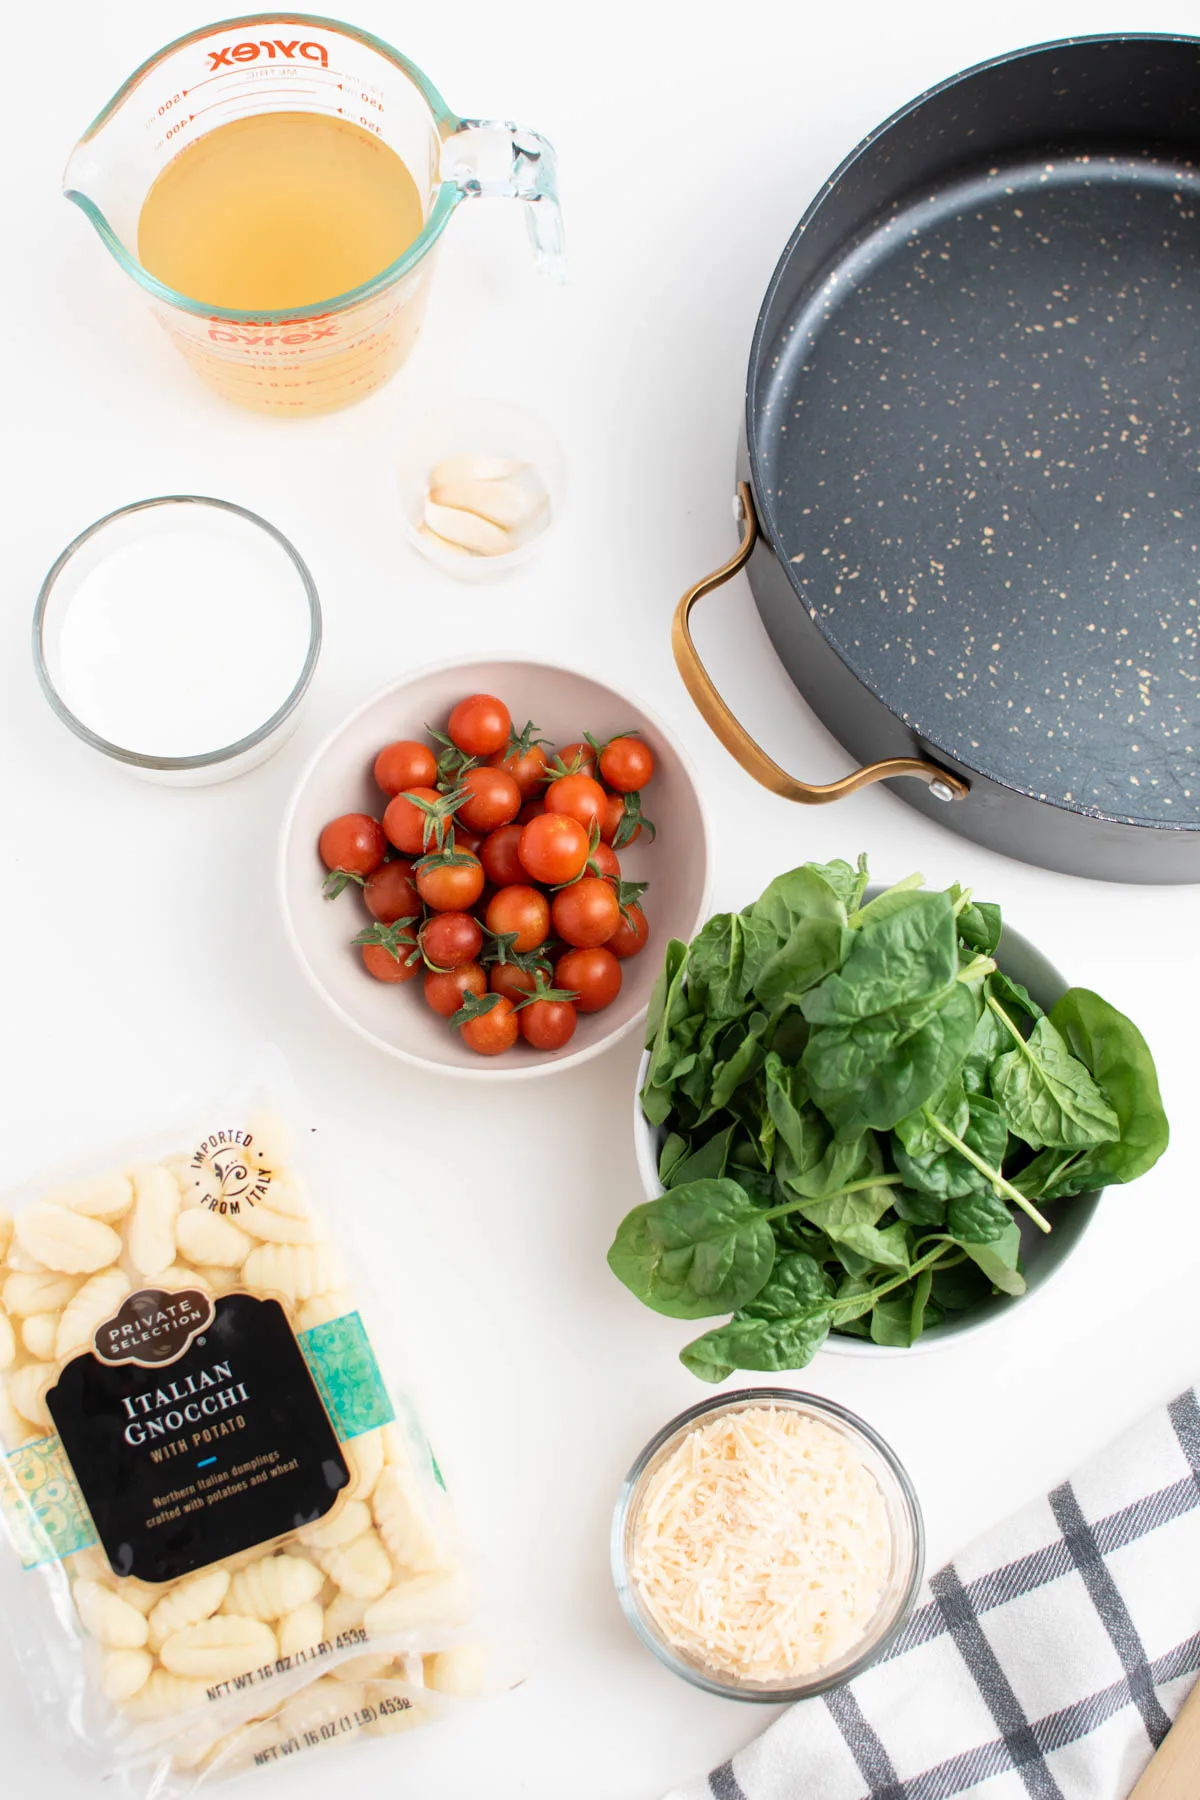 Creamy gnocchi ingredients including tomatoes, spinach, cheese, and cream on white table.